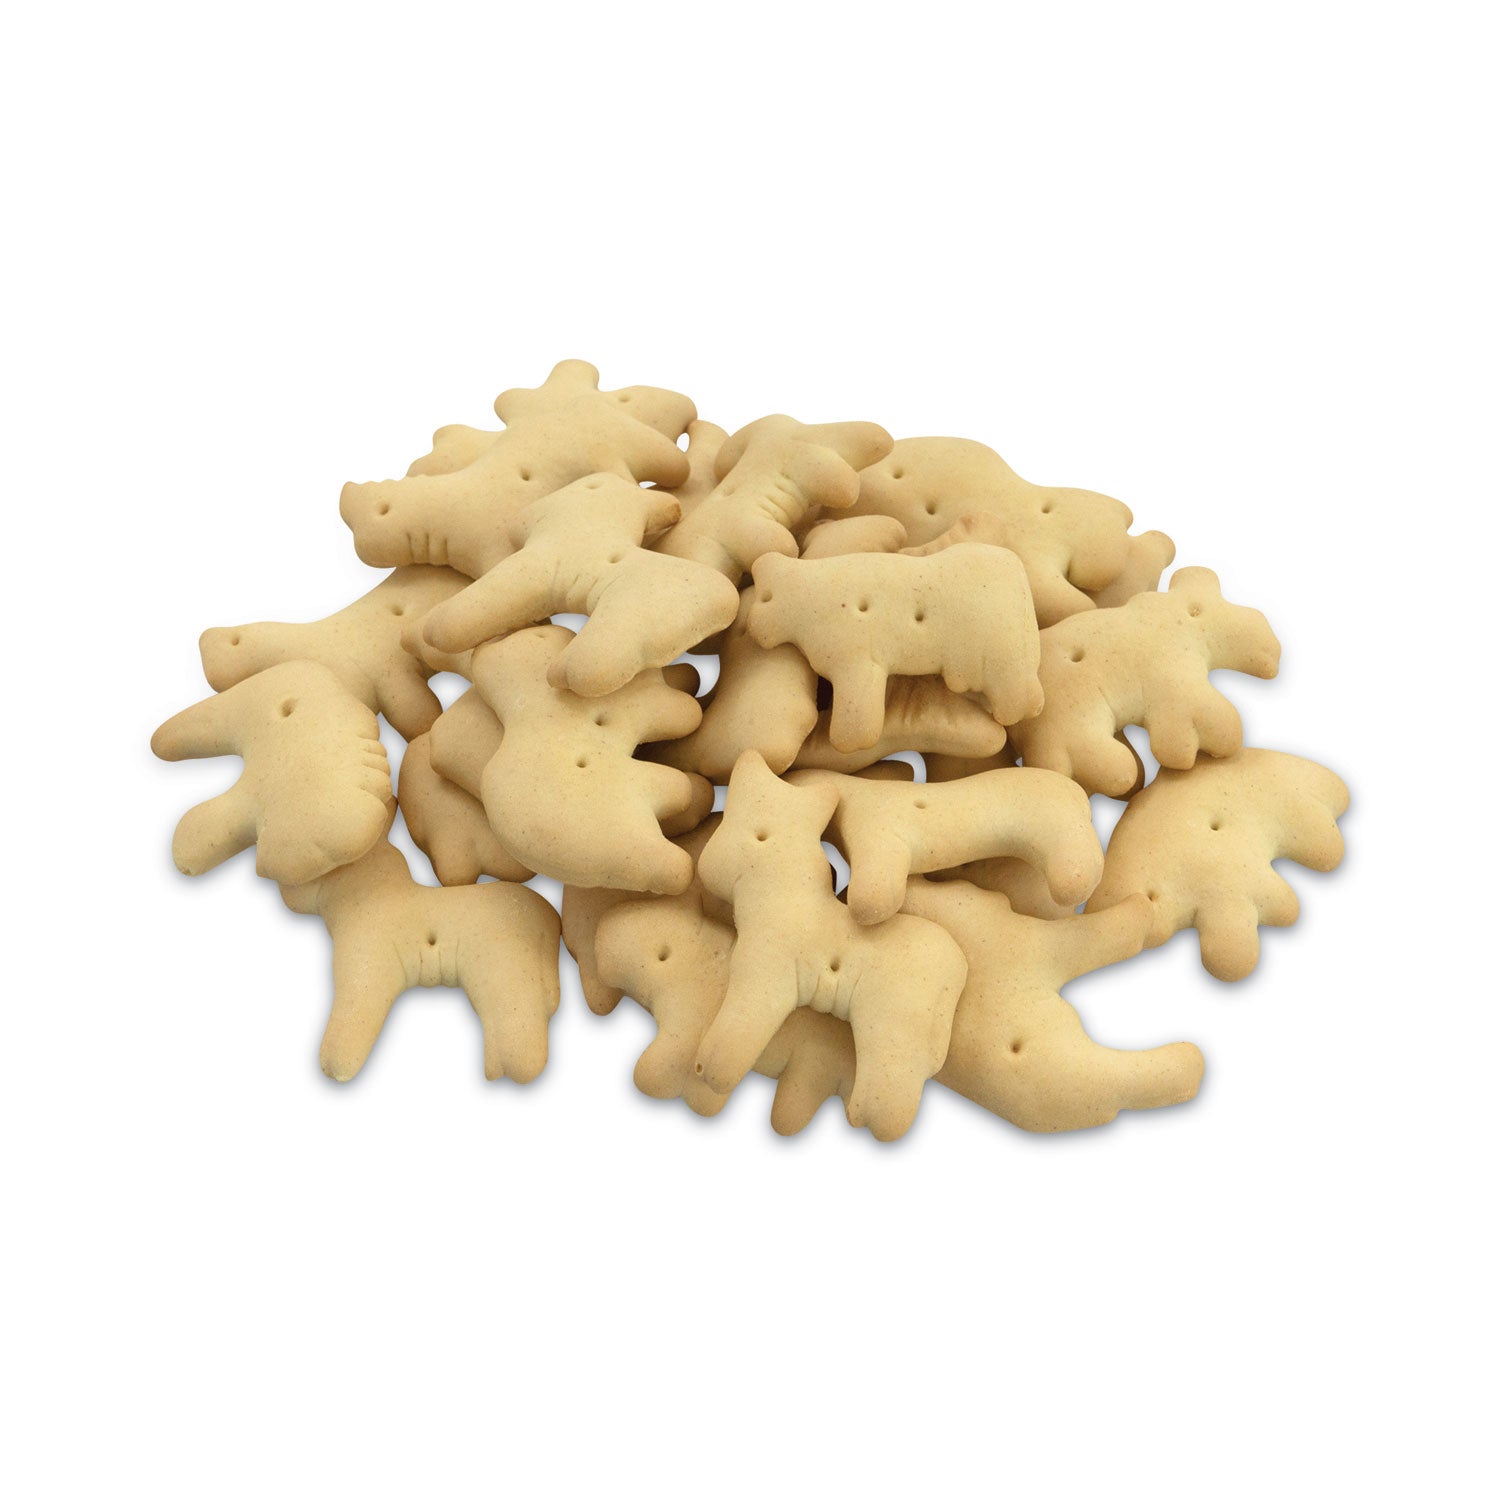 animal-crackers-62-oz-tub-ships-in-1-3-business-days_grr22000464 - 2